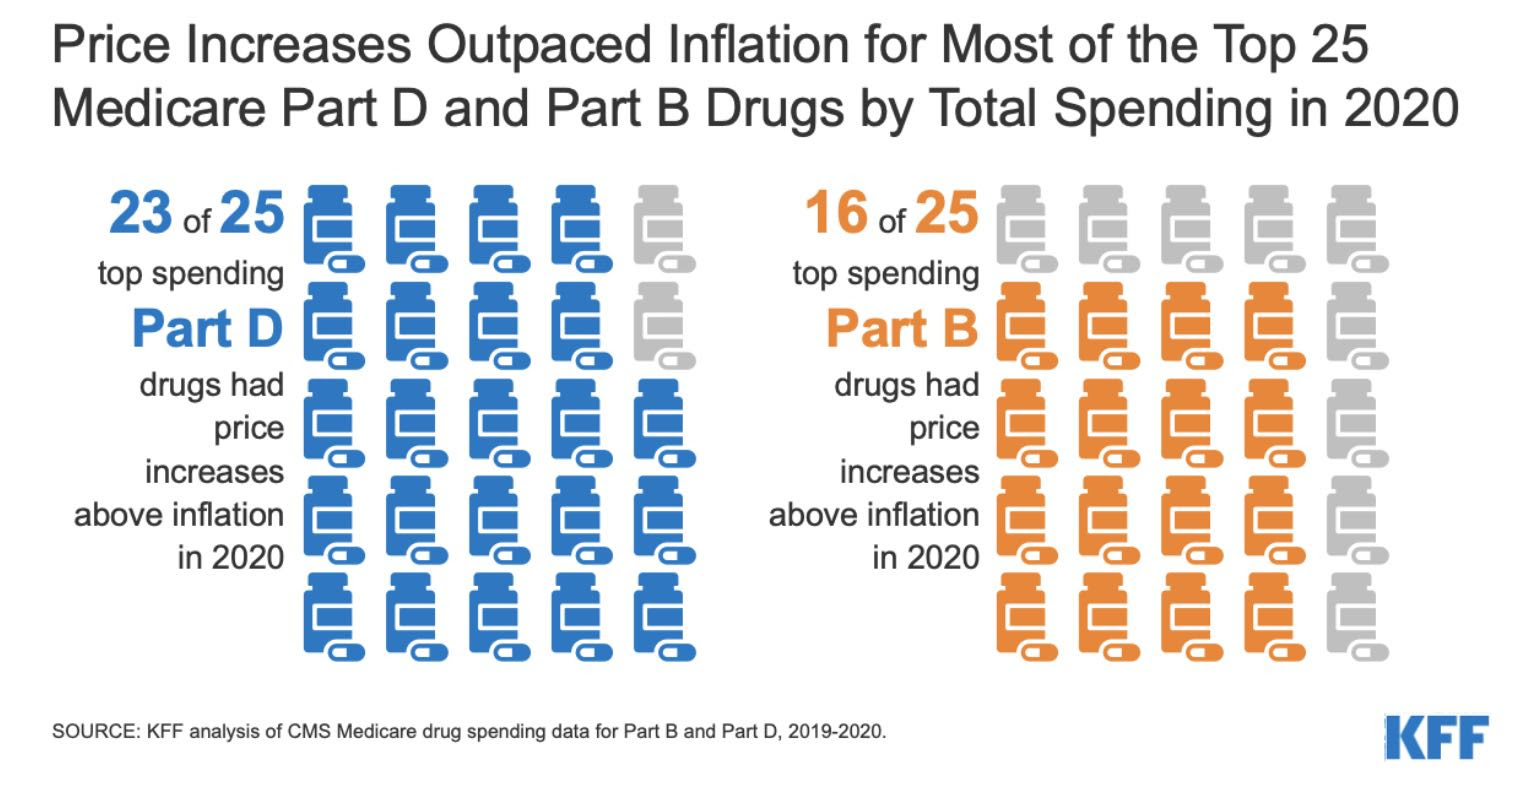 Drug prices increased faster than inflation